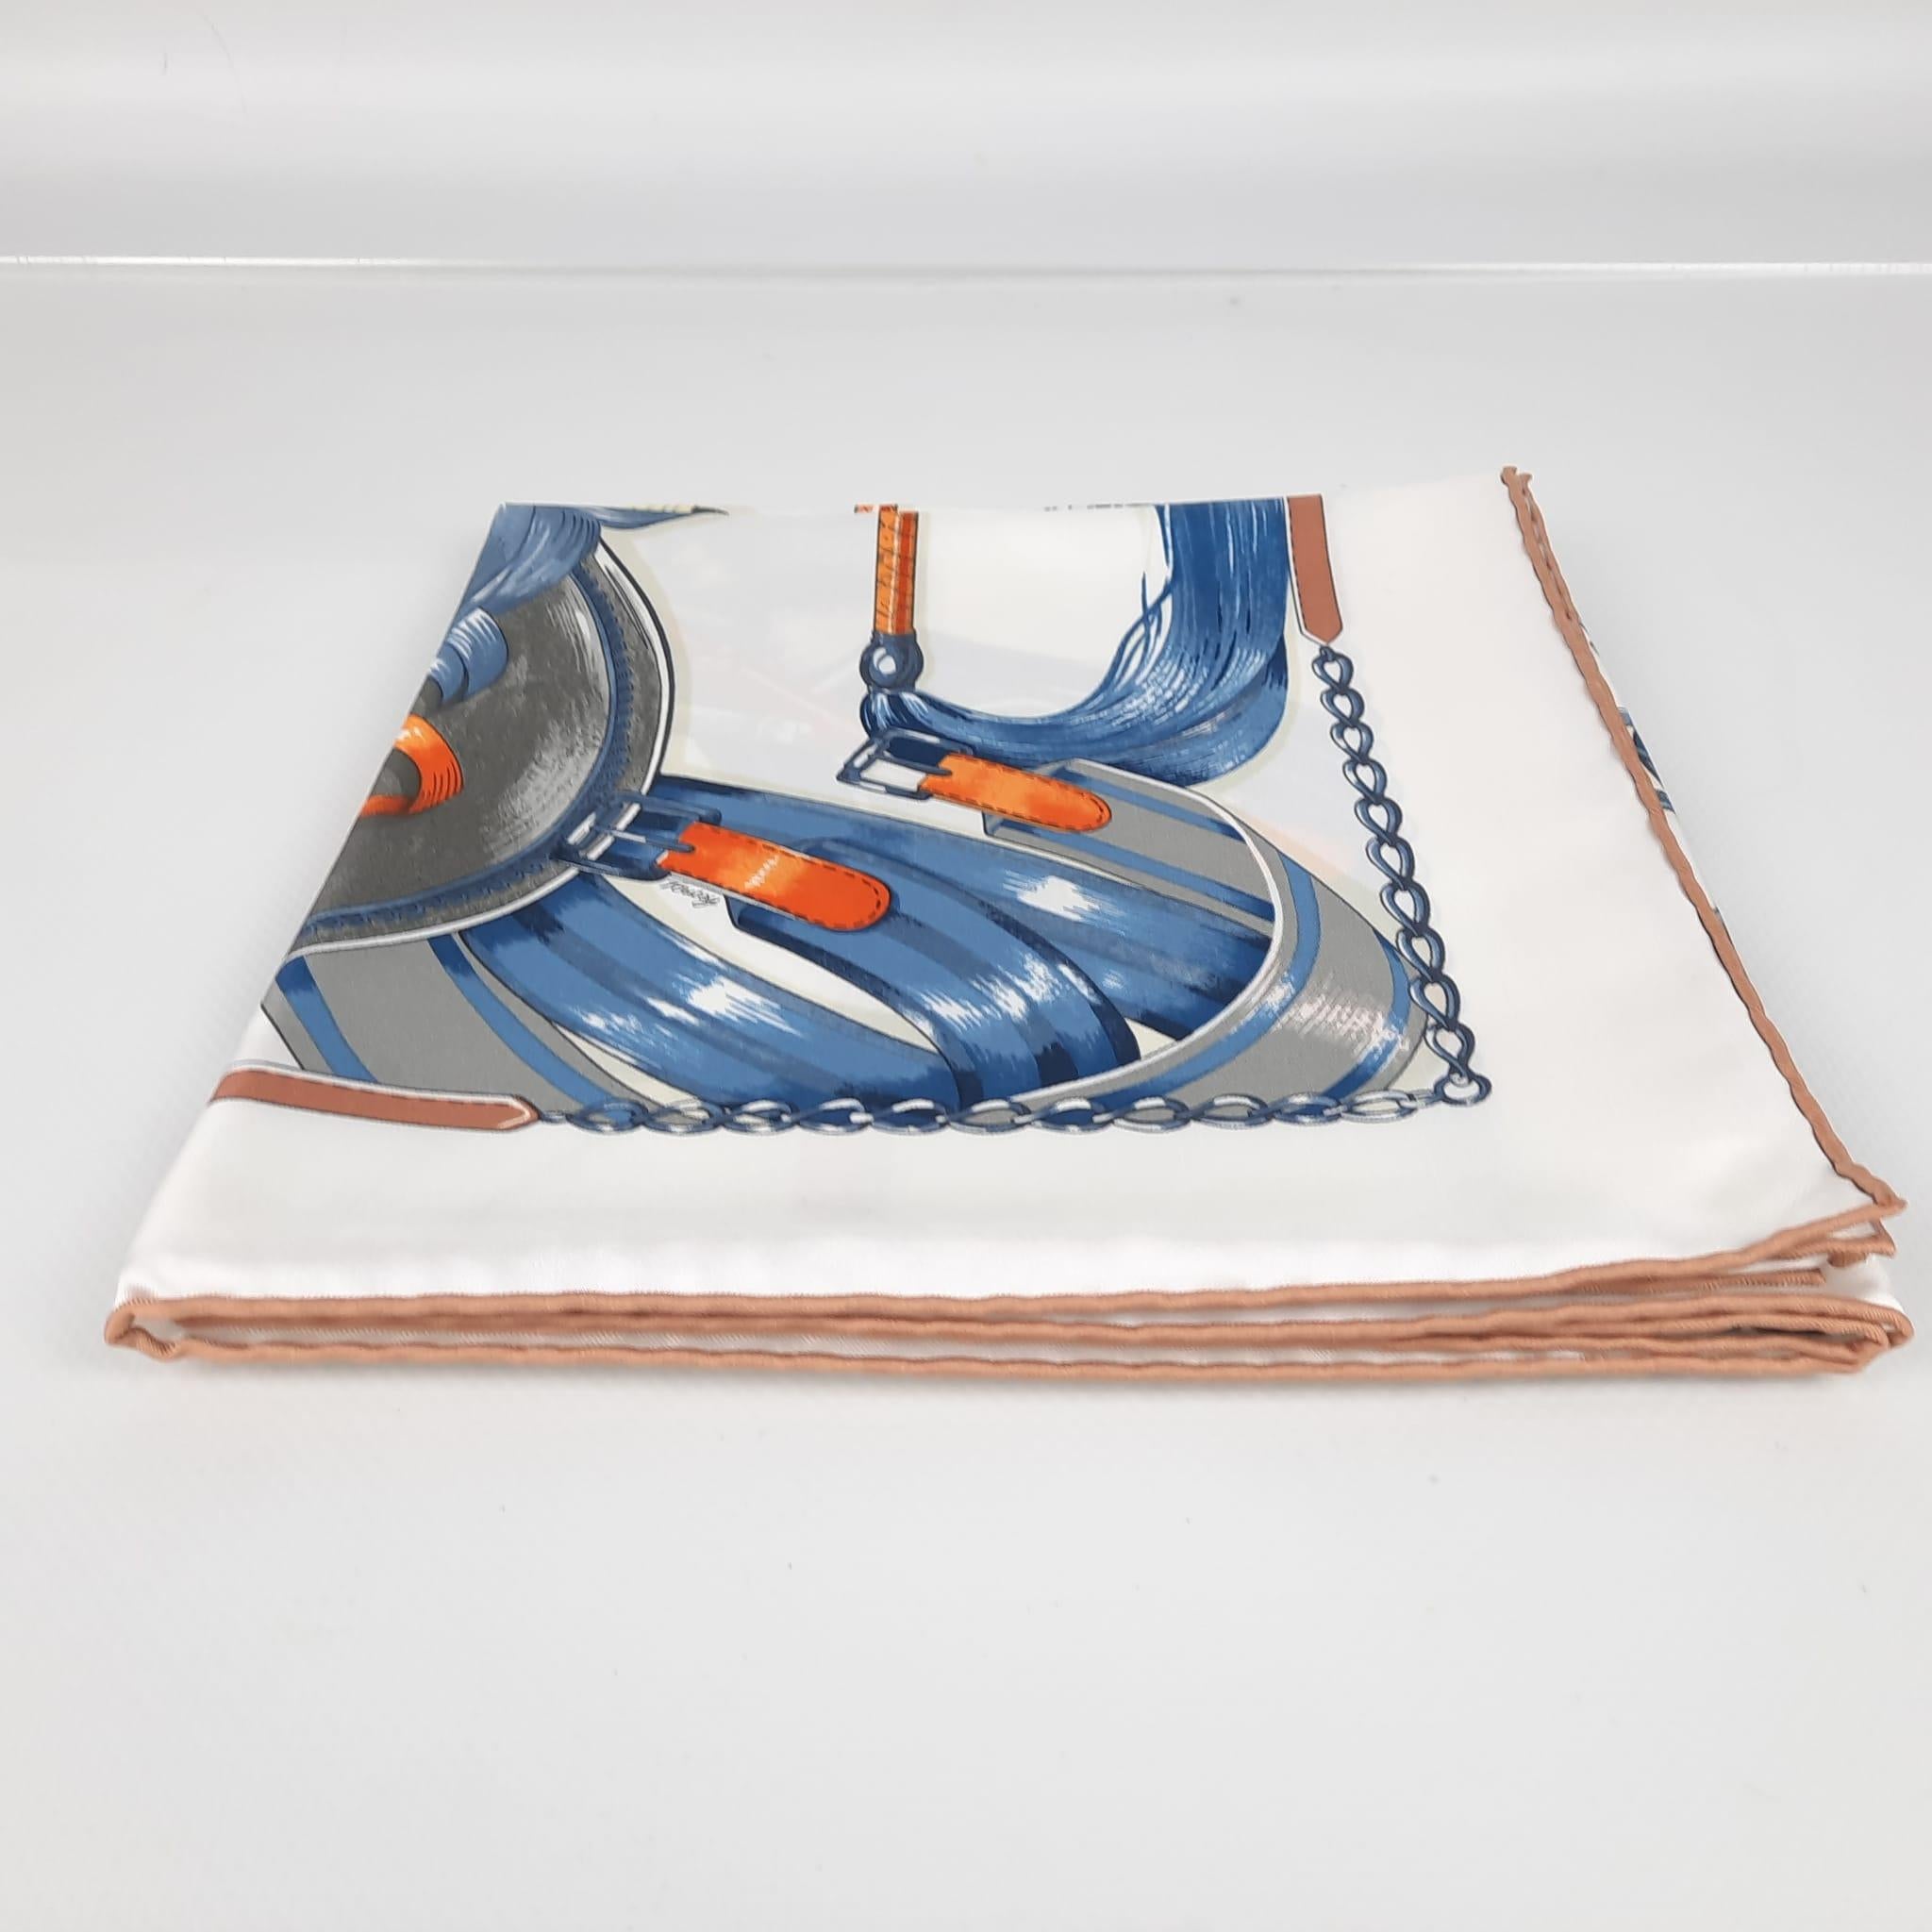 Scarf in silk twill with hand-rolled edges (100% silk).
Designed by Laurence Bourthoumieux